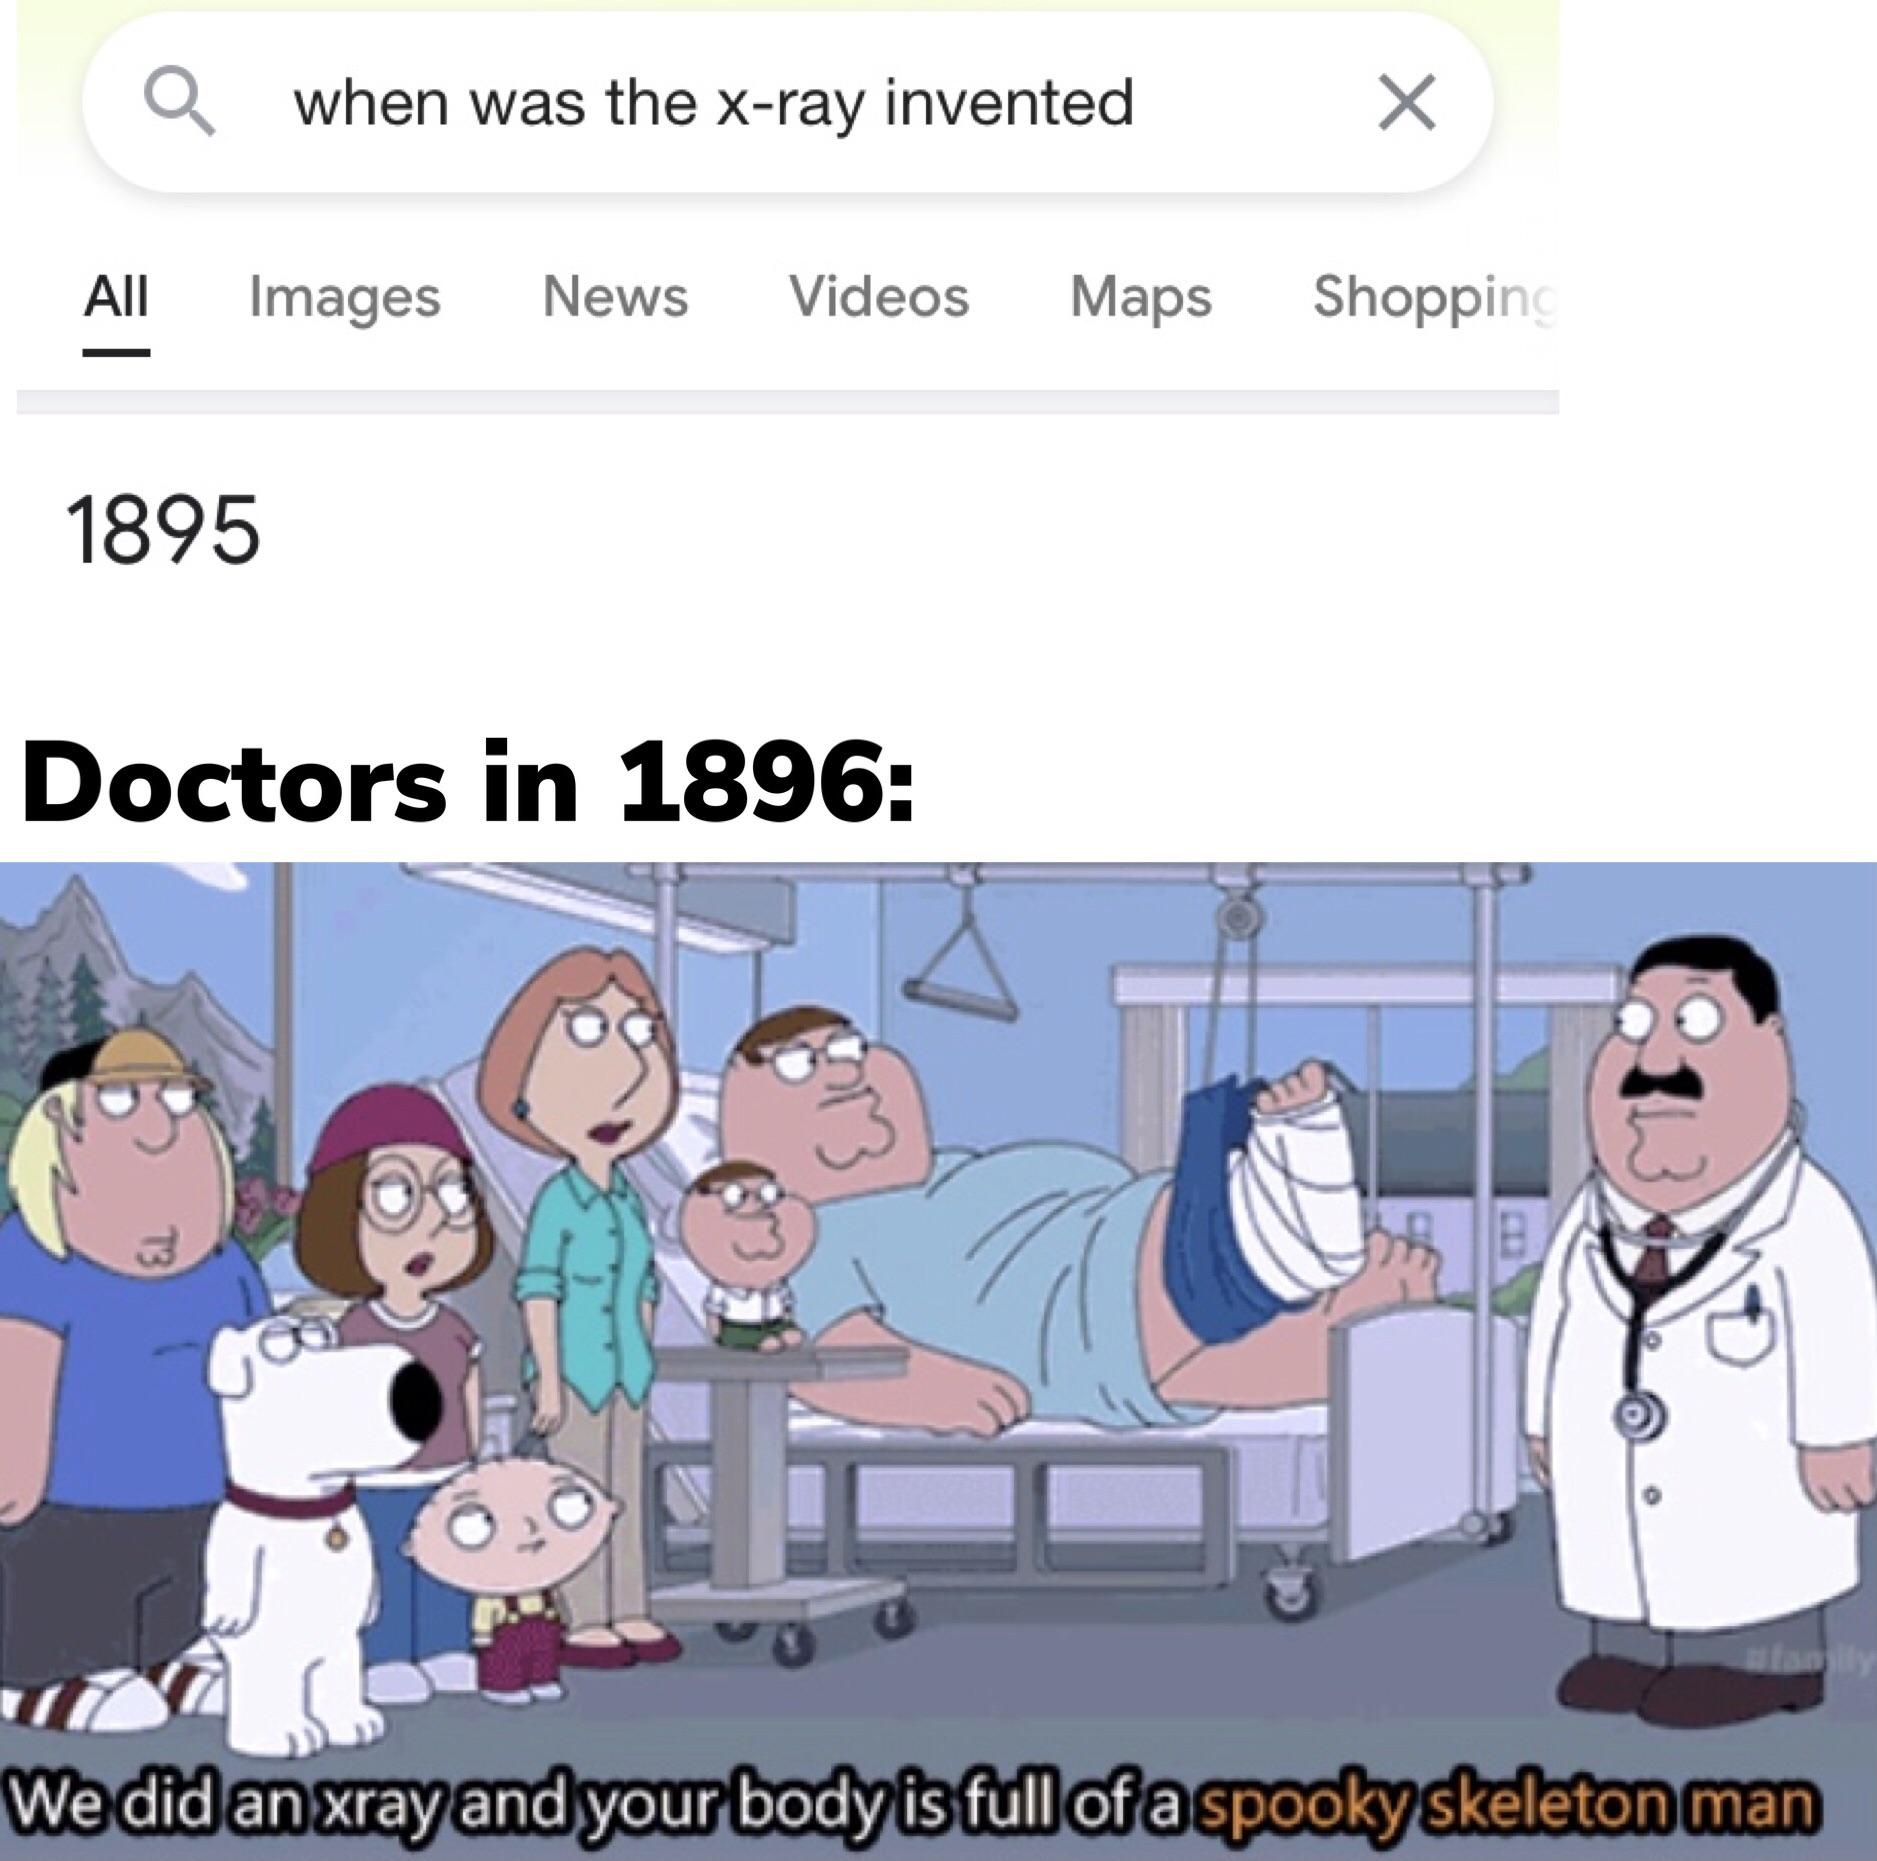 dank memes - cartoon - when was the xray invented x All Images News Videos Maps Shopping 1895 Doctors in 1896 5B We did an xray and your body is full of a spooky skeleton man